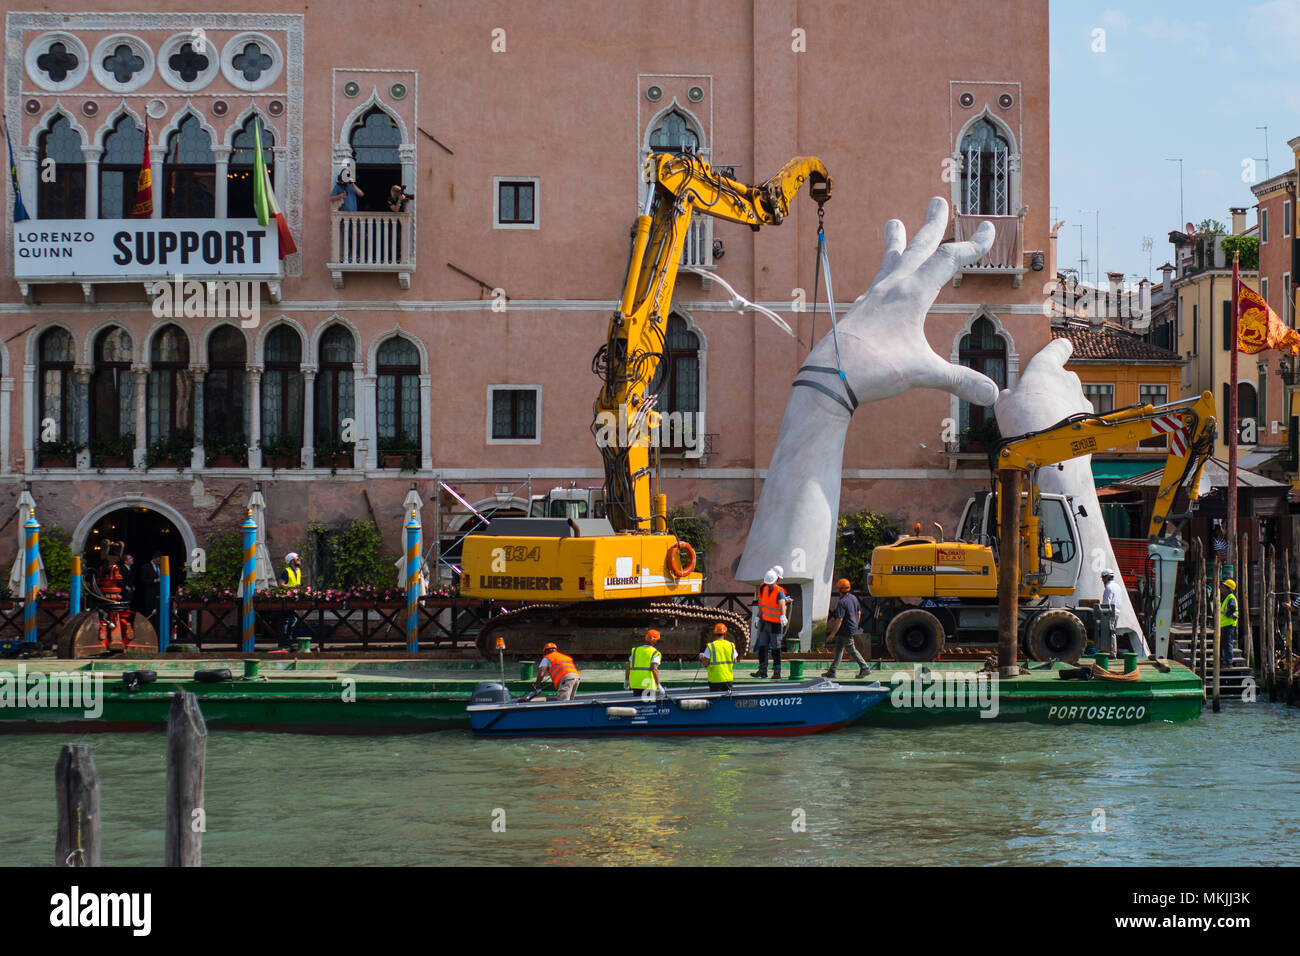 VENICE, ITALY. 08 MAY, 2018. One hand of the work of Lorenzo Quinn is disassembled and placed on a large barge for transport in Venice, Italy on 5 May 2018. The work of the artist Lorenzo Quinn 'Support', known as the 'big hands that support Venice', leave the Grand Canal to return to the artist's studio in Spain. © Simone Padovani / Awakening / Alamy Live News Stock Photo